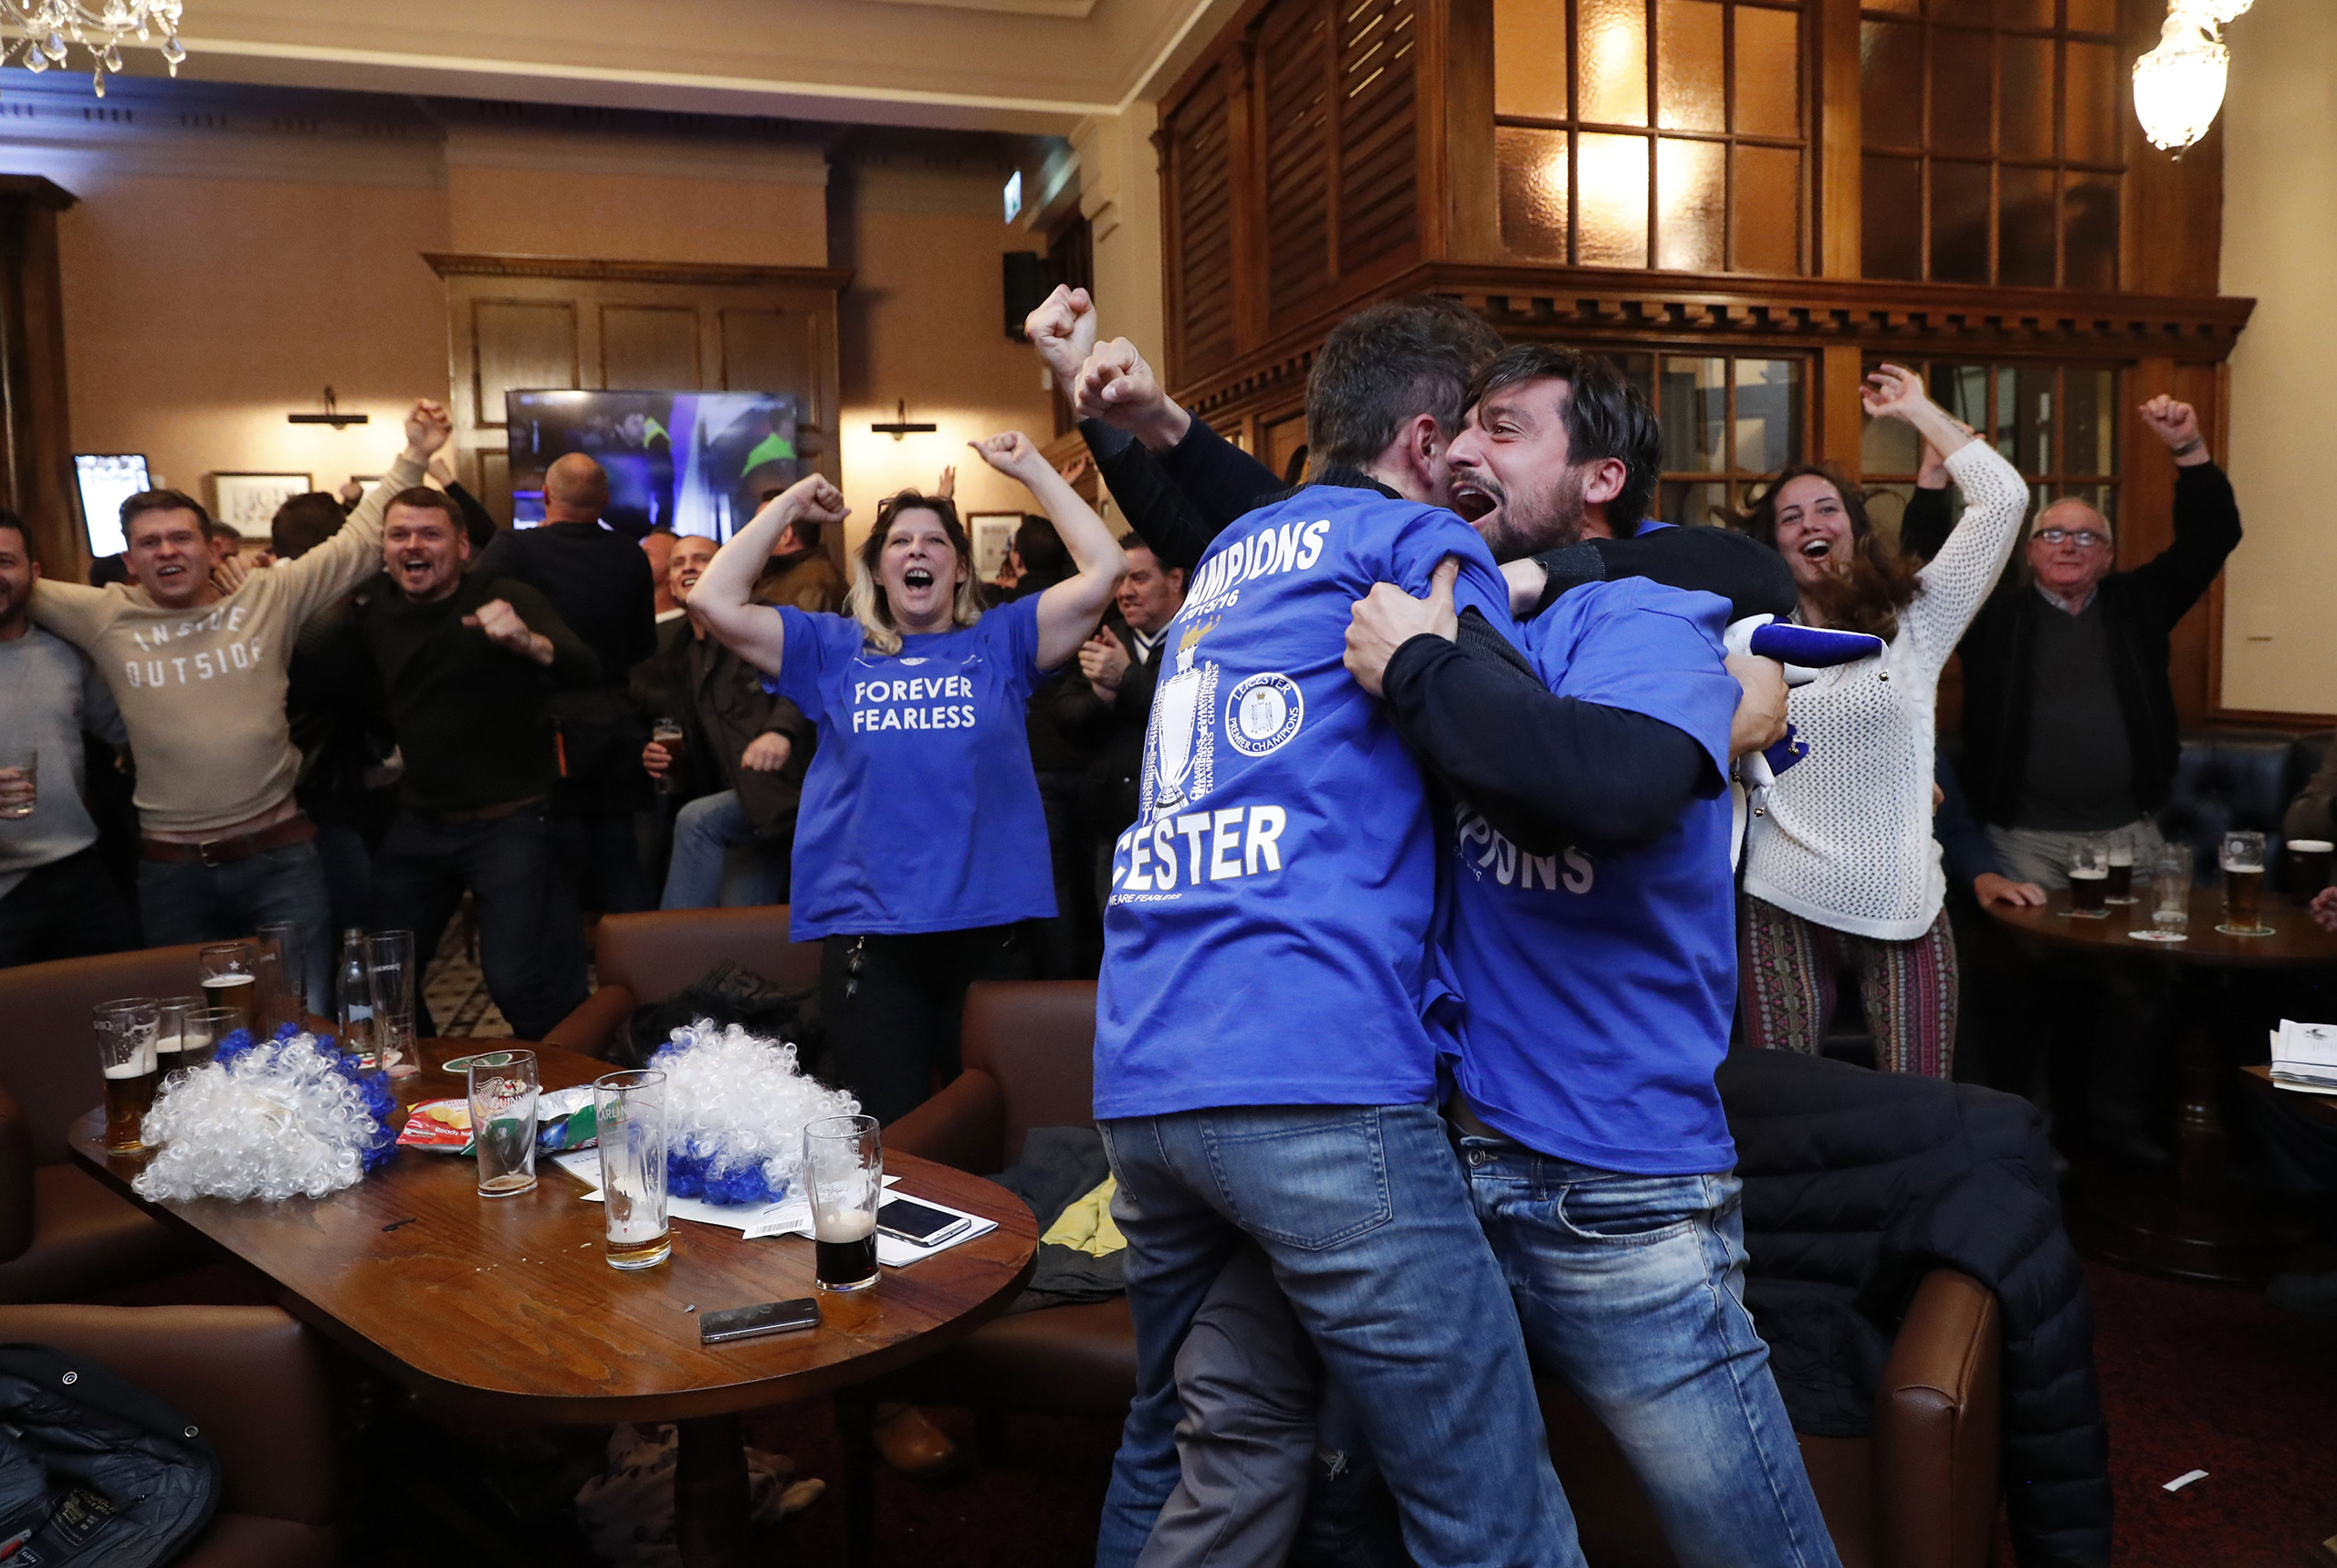 Leicester City fans celebrate after Chelsea's second goal against Tottenham Hotspur at a pub in Leicester, eastern England, May 2, 2016. (Eddie Keogh—Reuters)